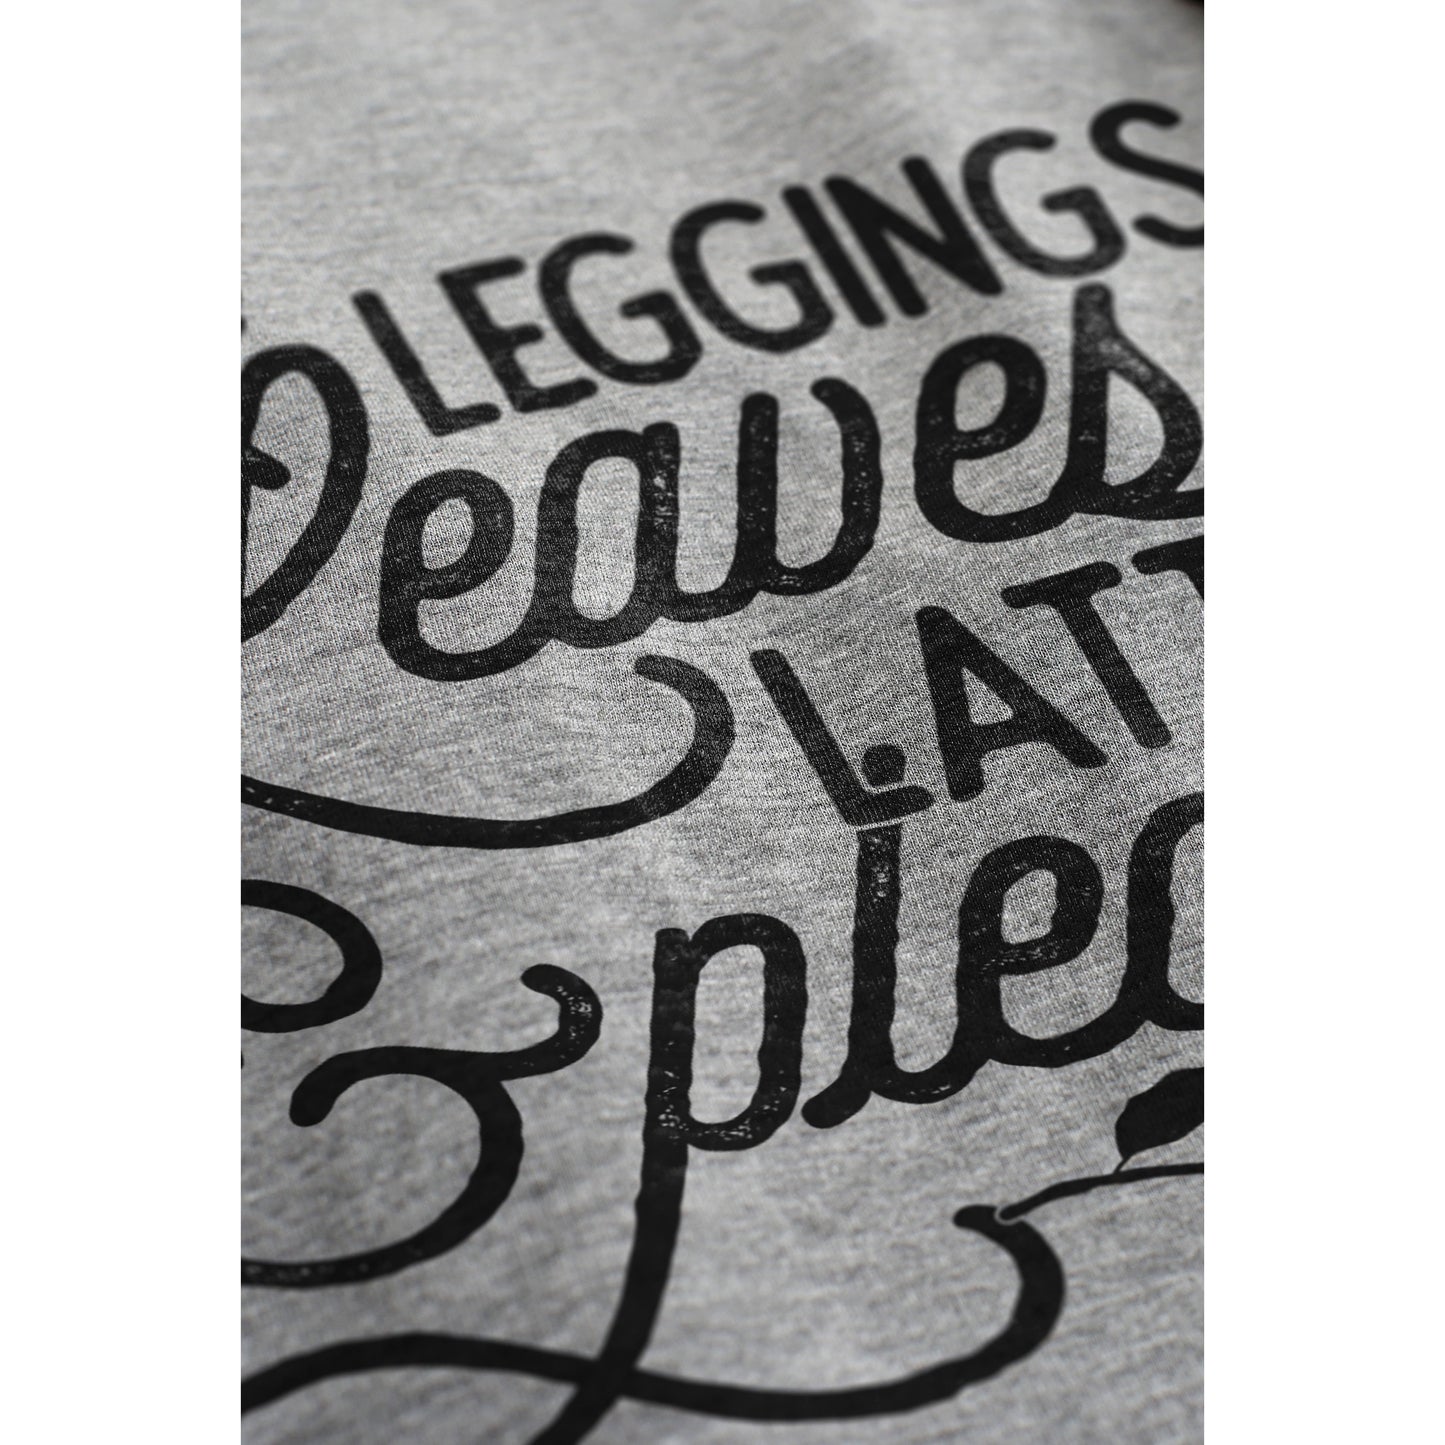 Leggings Leaves & Lattes Please - thread tank | Stories you can wear.